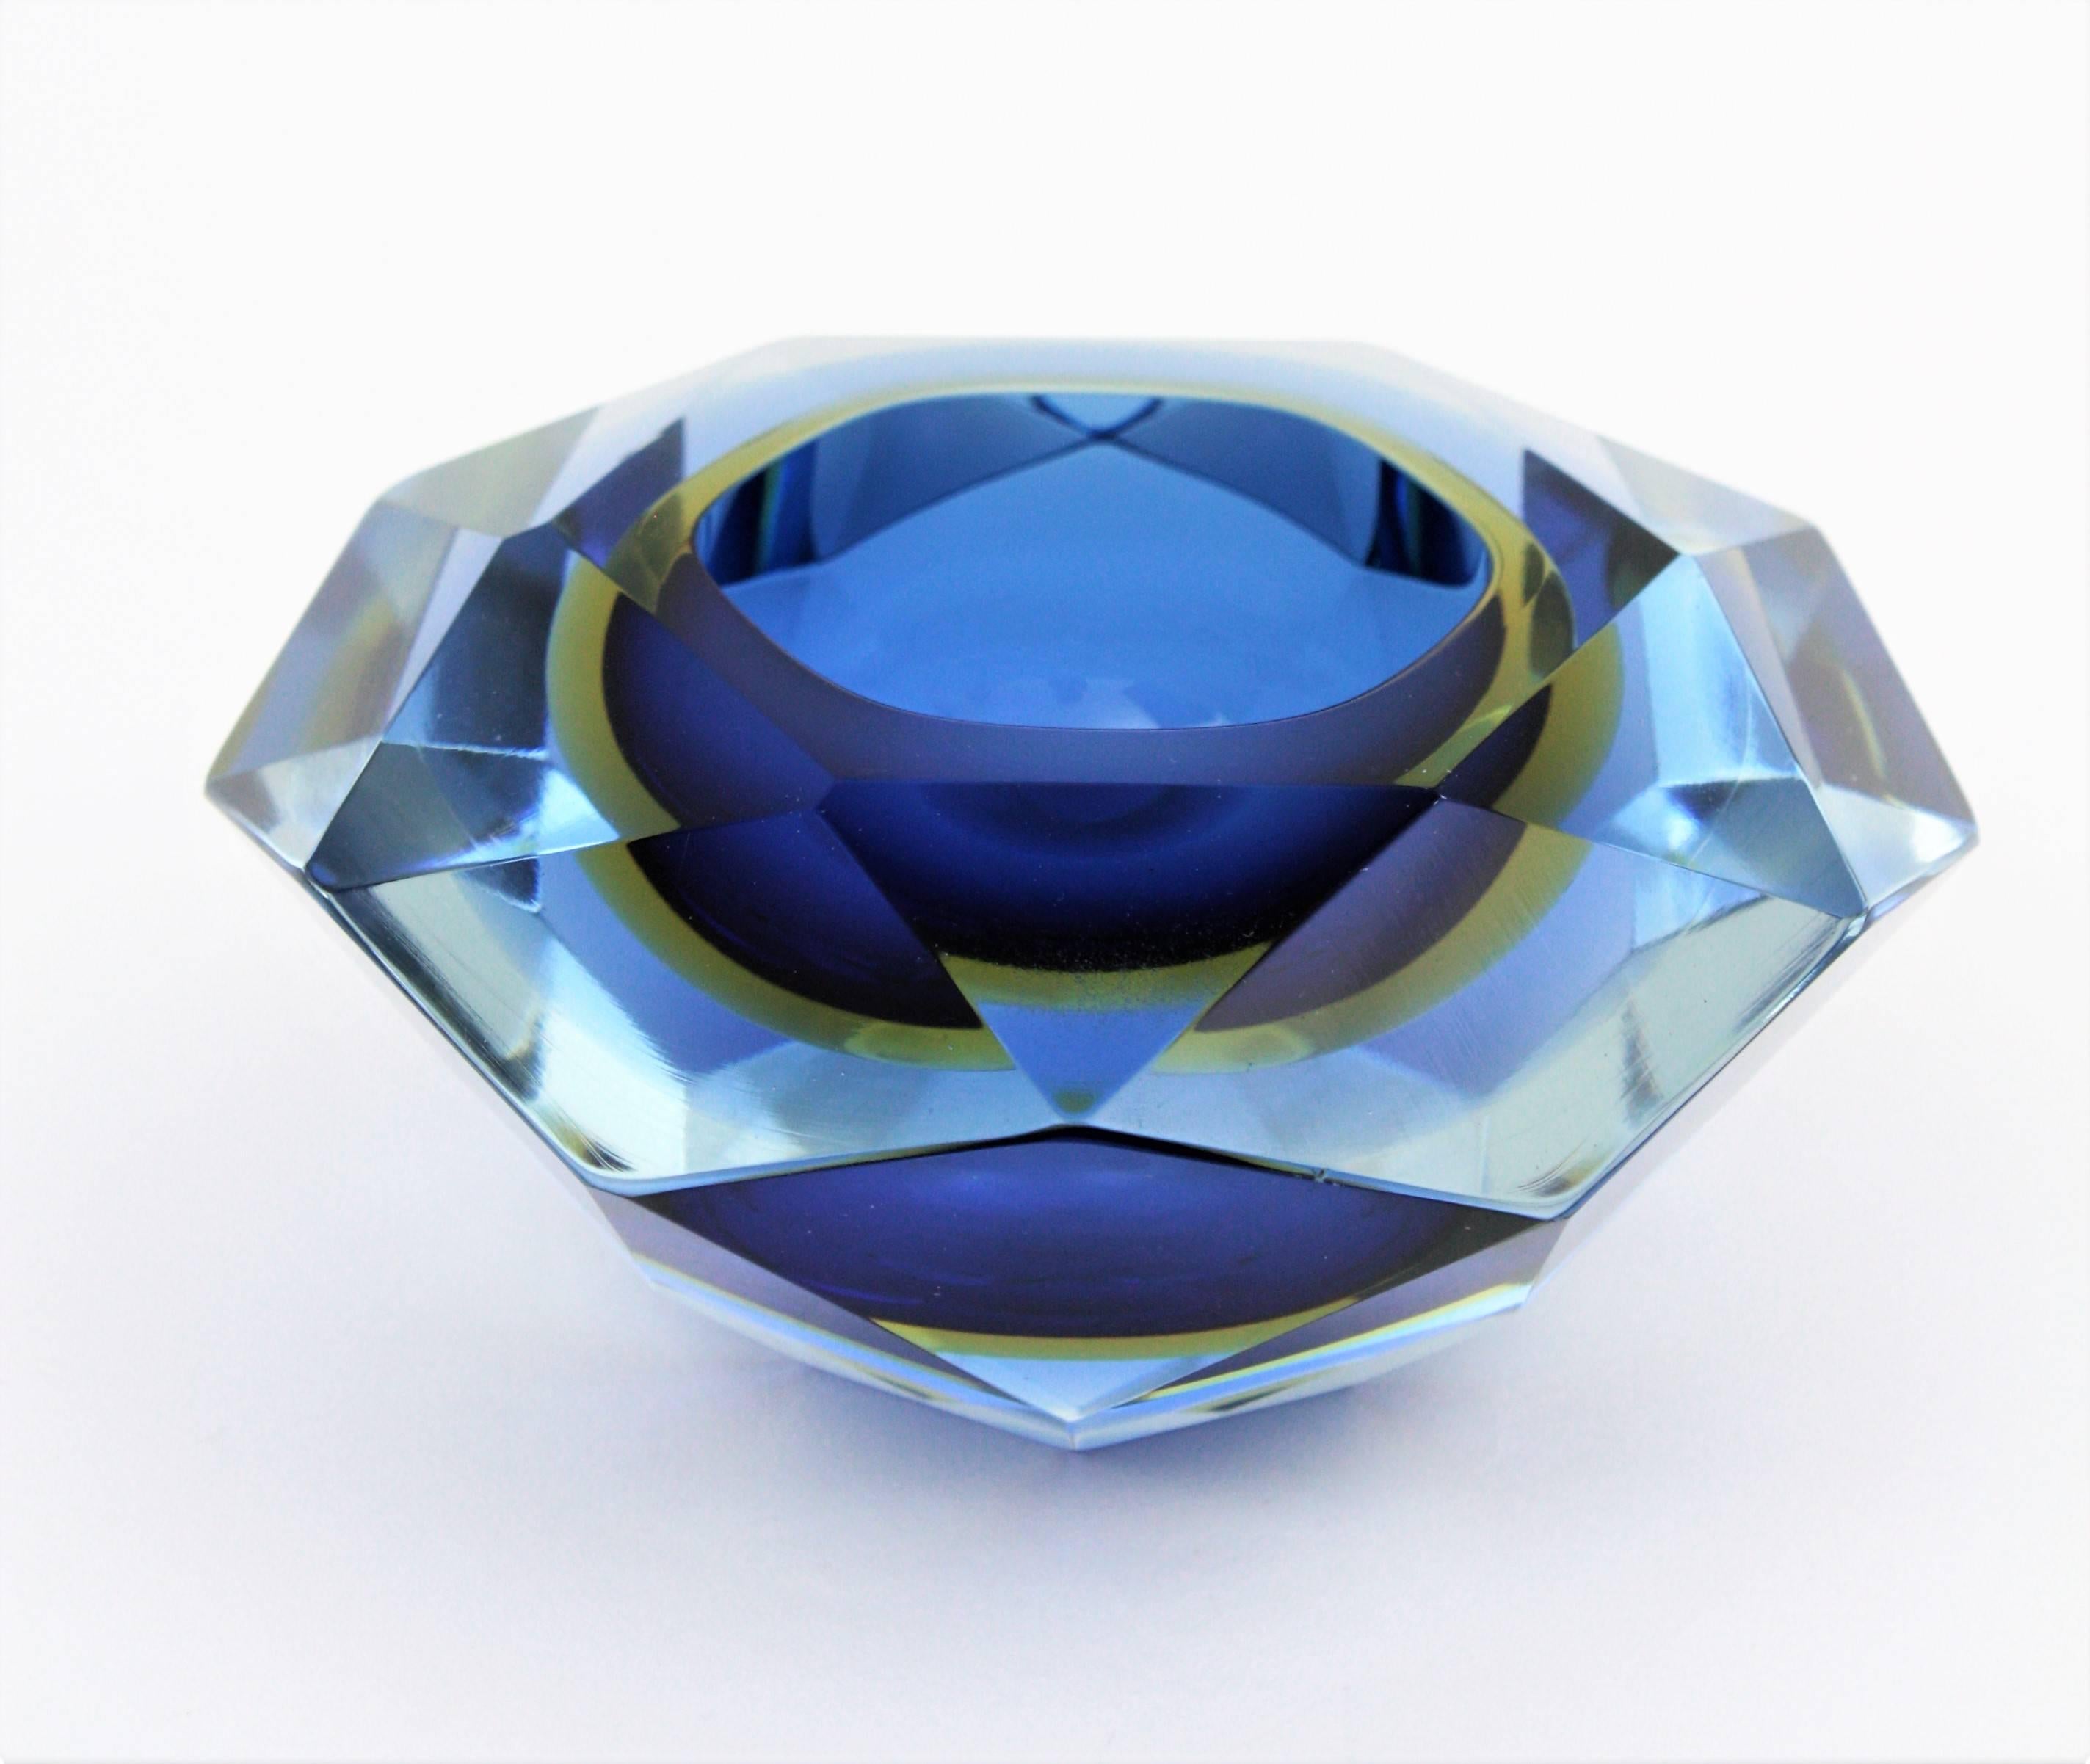 Flavio Poli Murano Cobalt Blue and Yellow Sommerso Faceted Giant Art Glass Bowl 1